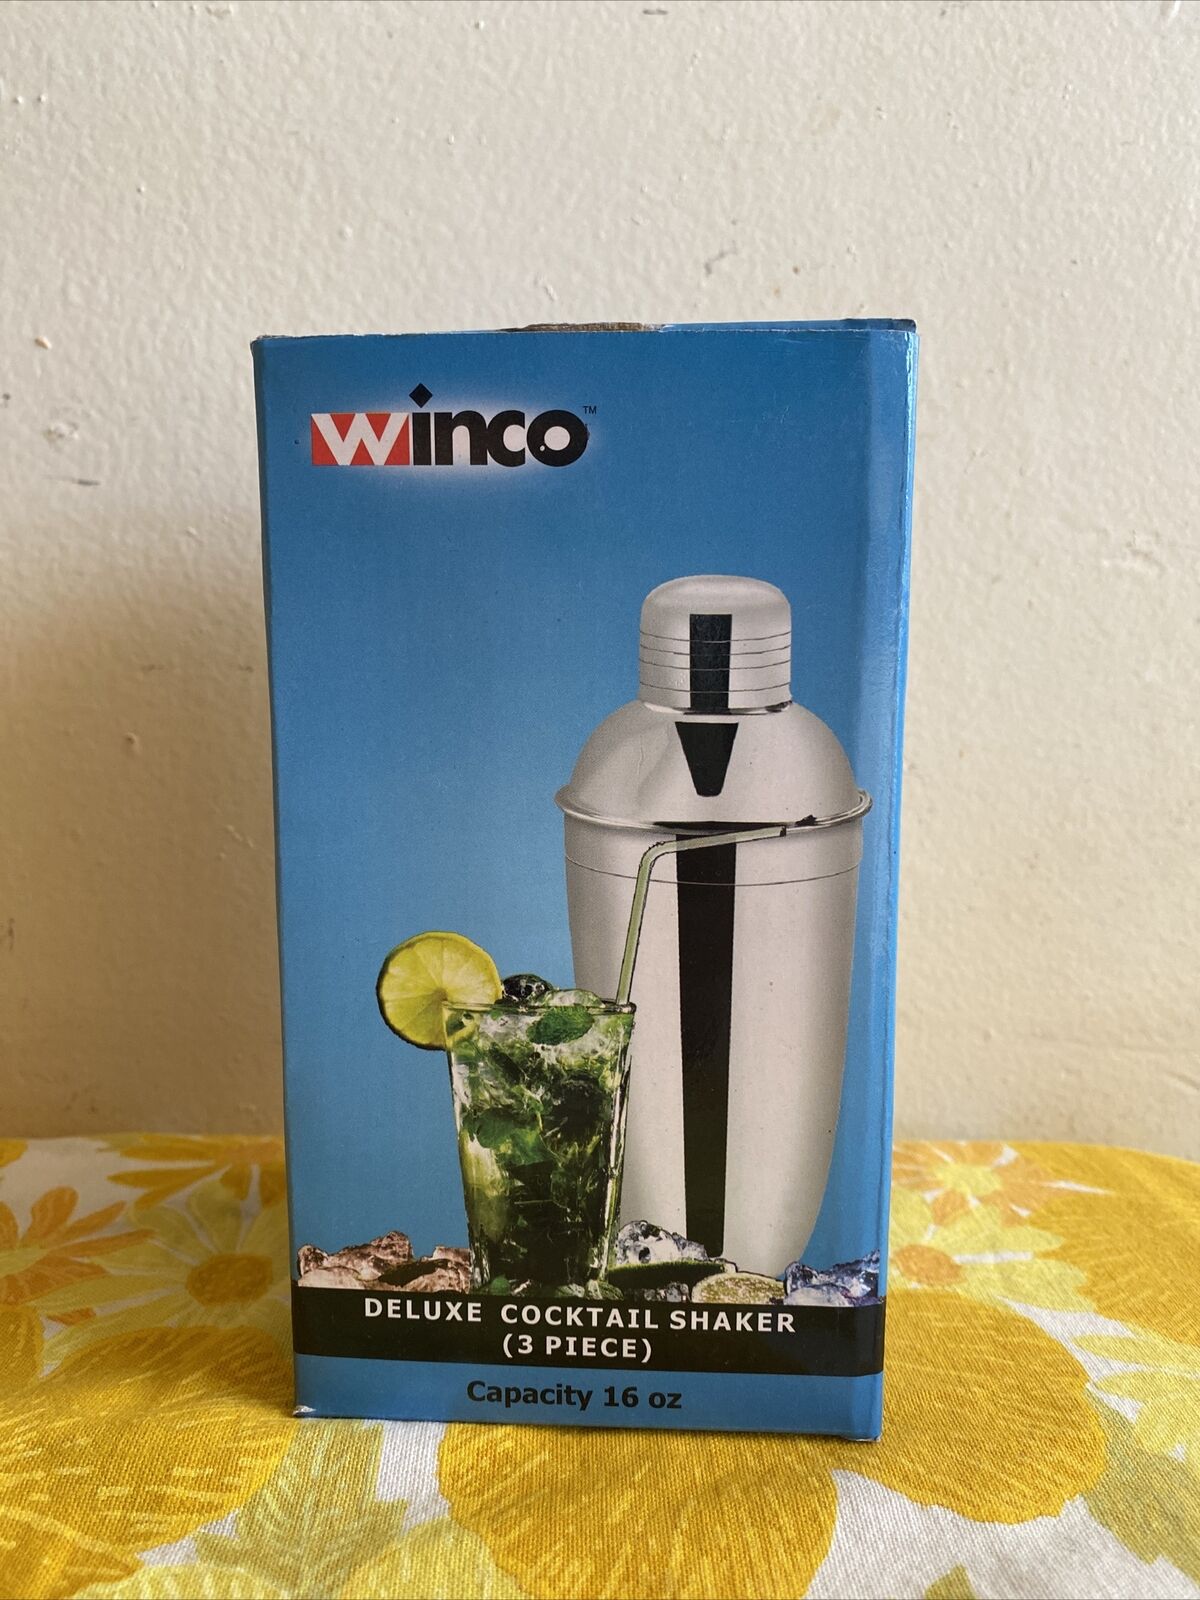 Winco Stainless Steel Deluxe Cocktail Shaker 16 Ounce New Free Shipping Bl-3p